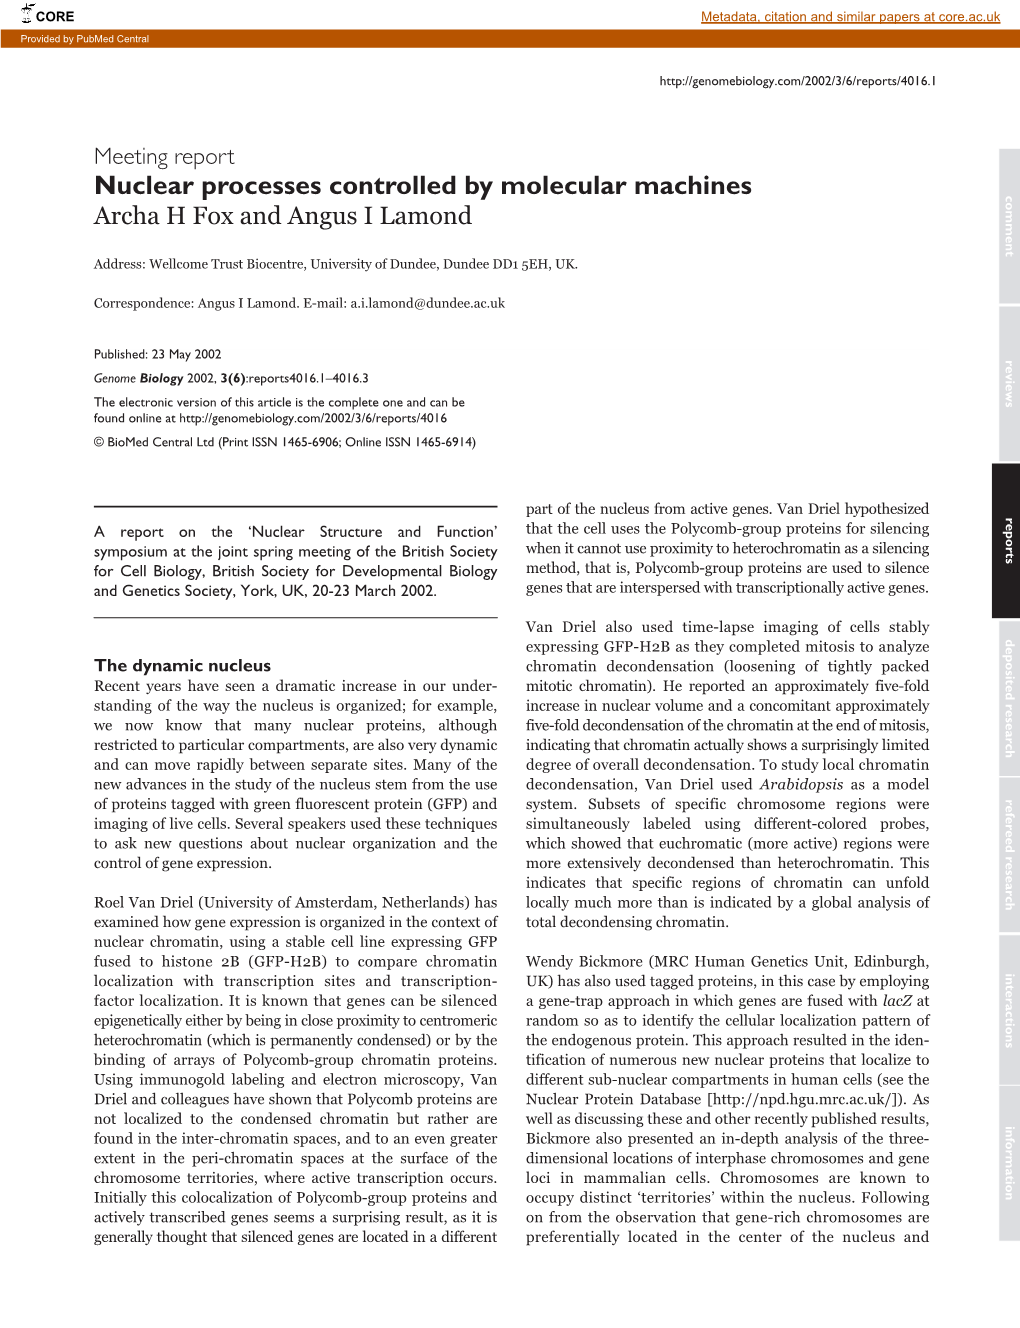 Nuclear Processes Controlled by Molecular Machines